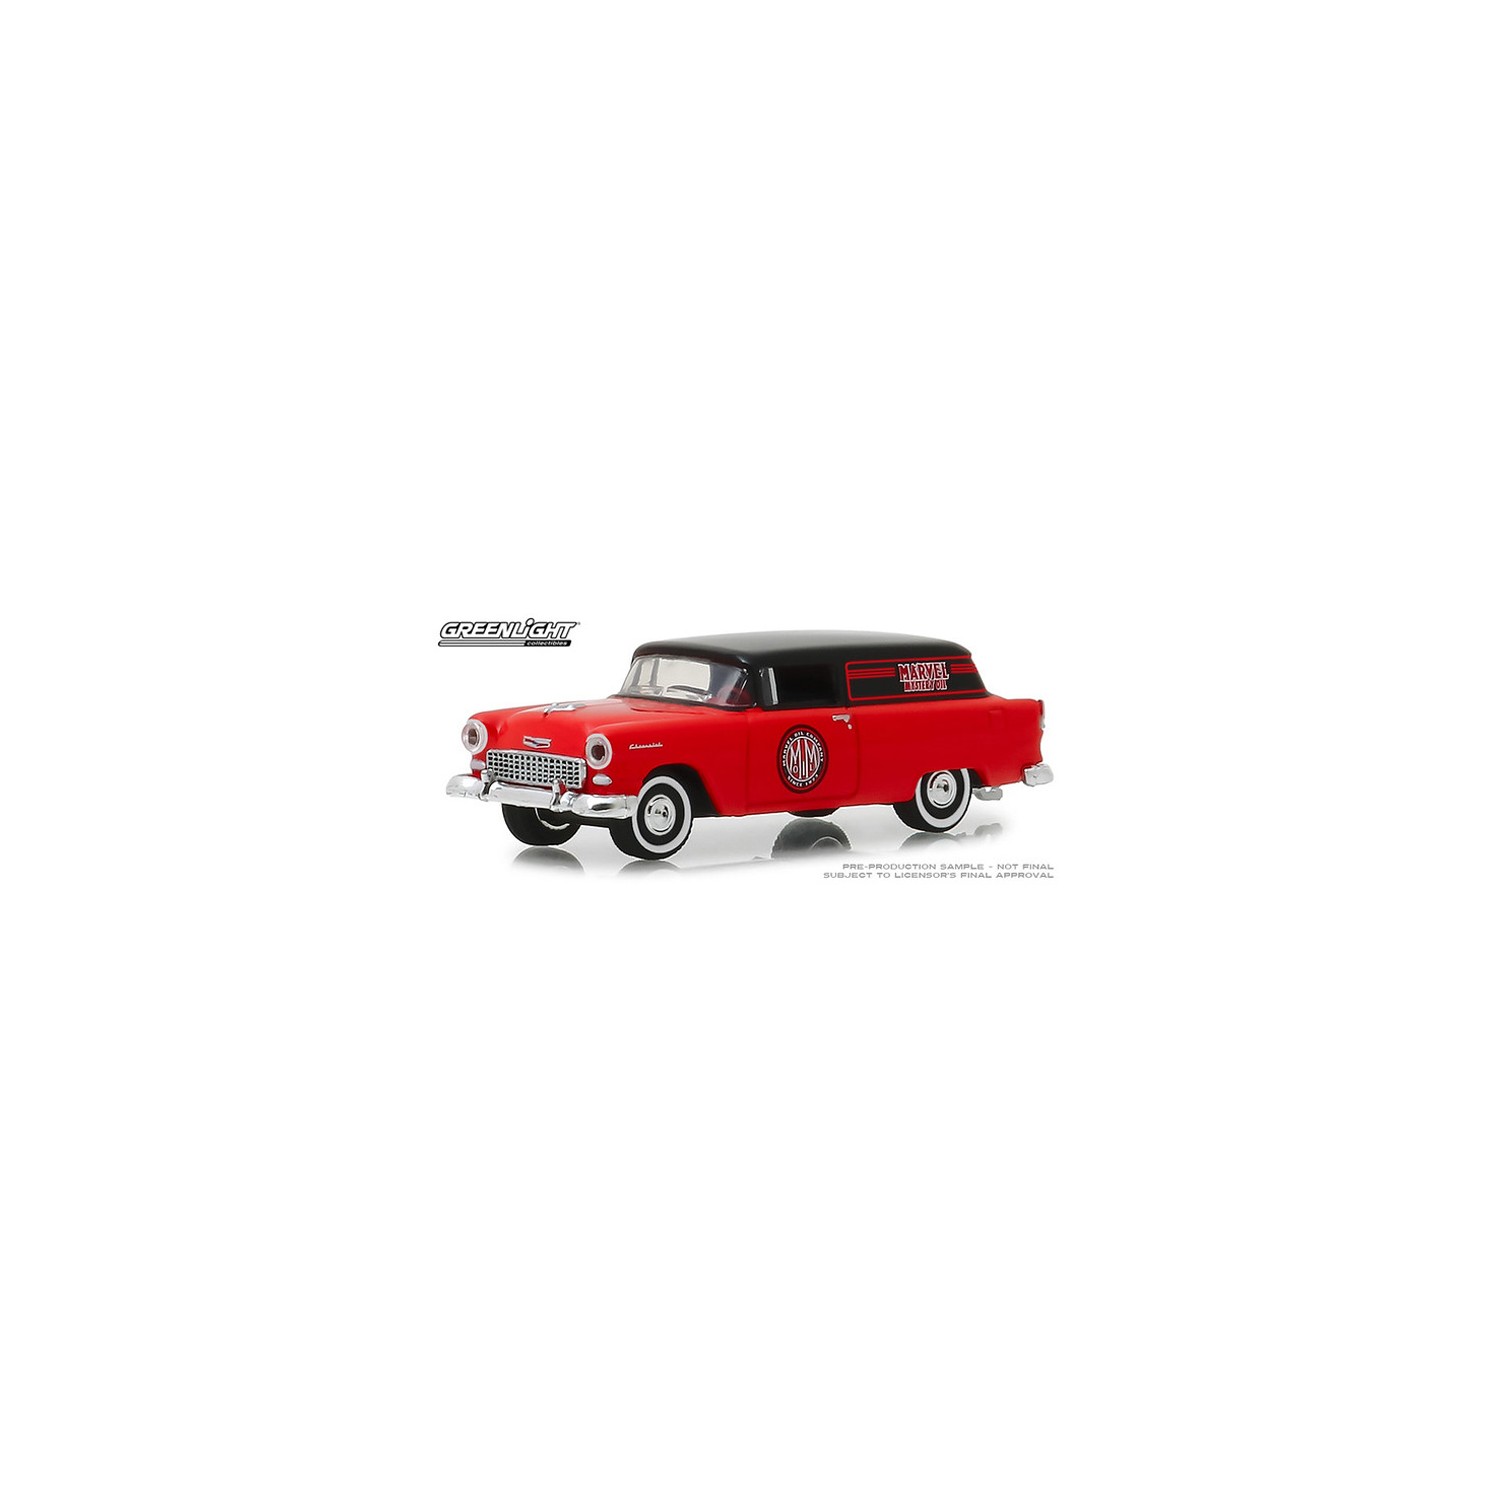 Details about   1/64 GREENLIGHT BLUE COLLAR 1955 CHEVROLET SEDAN DELIVERY MARVEL MYSTERY OIL RED 